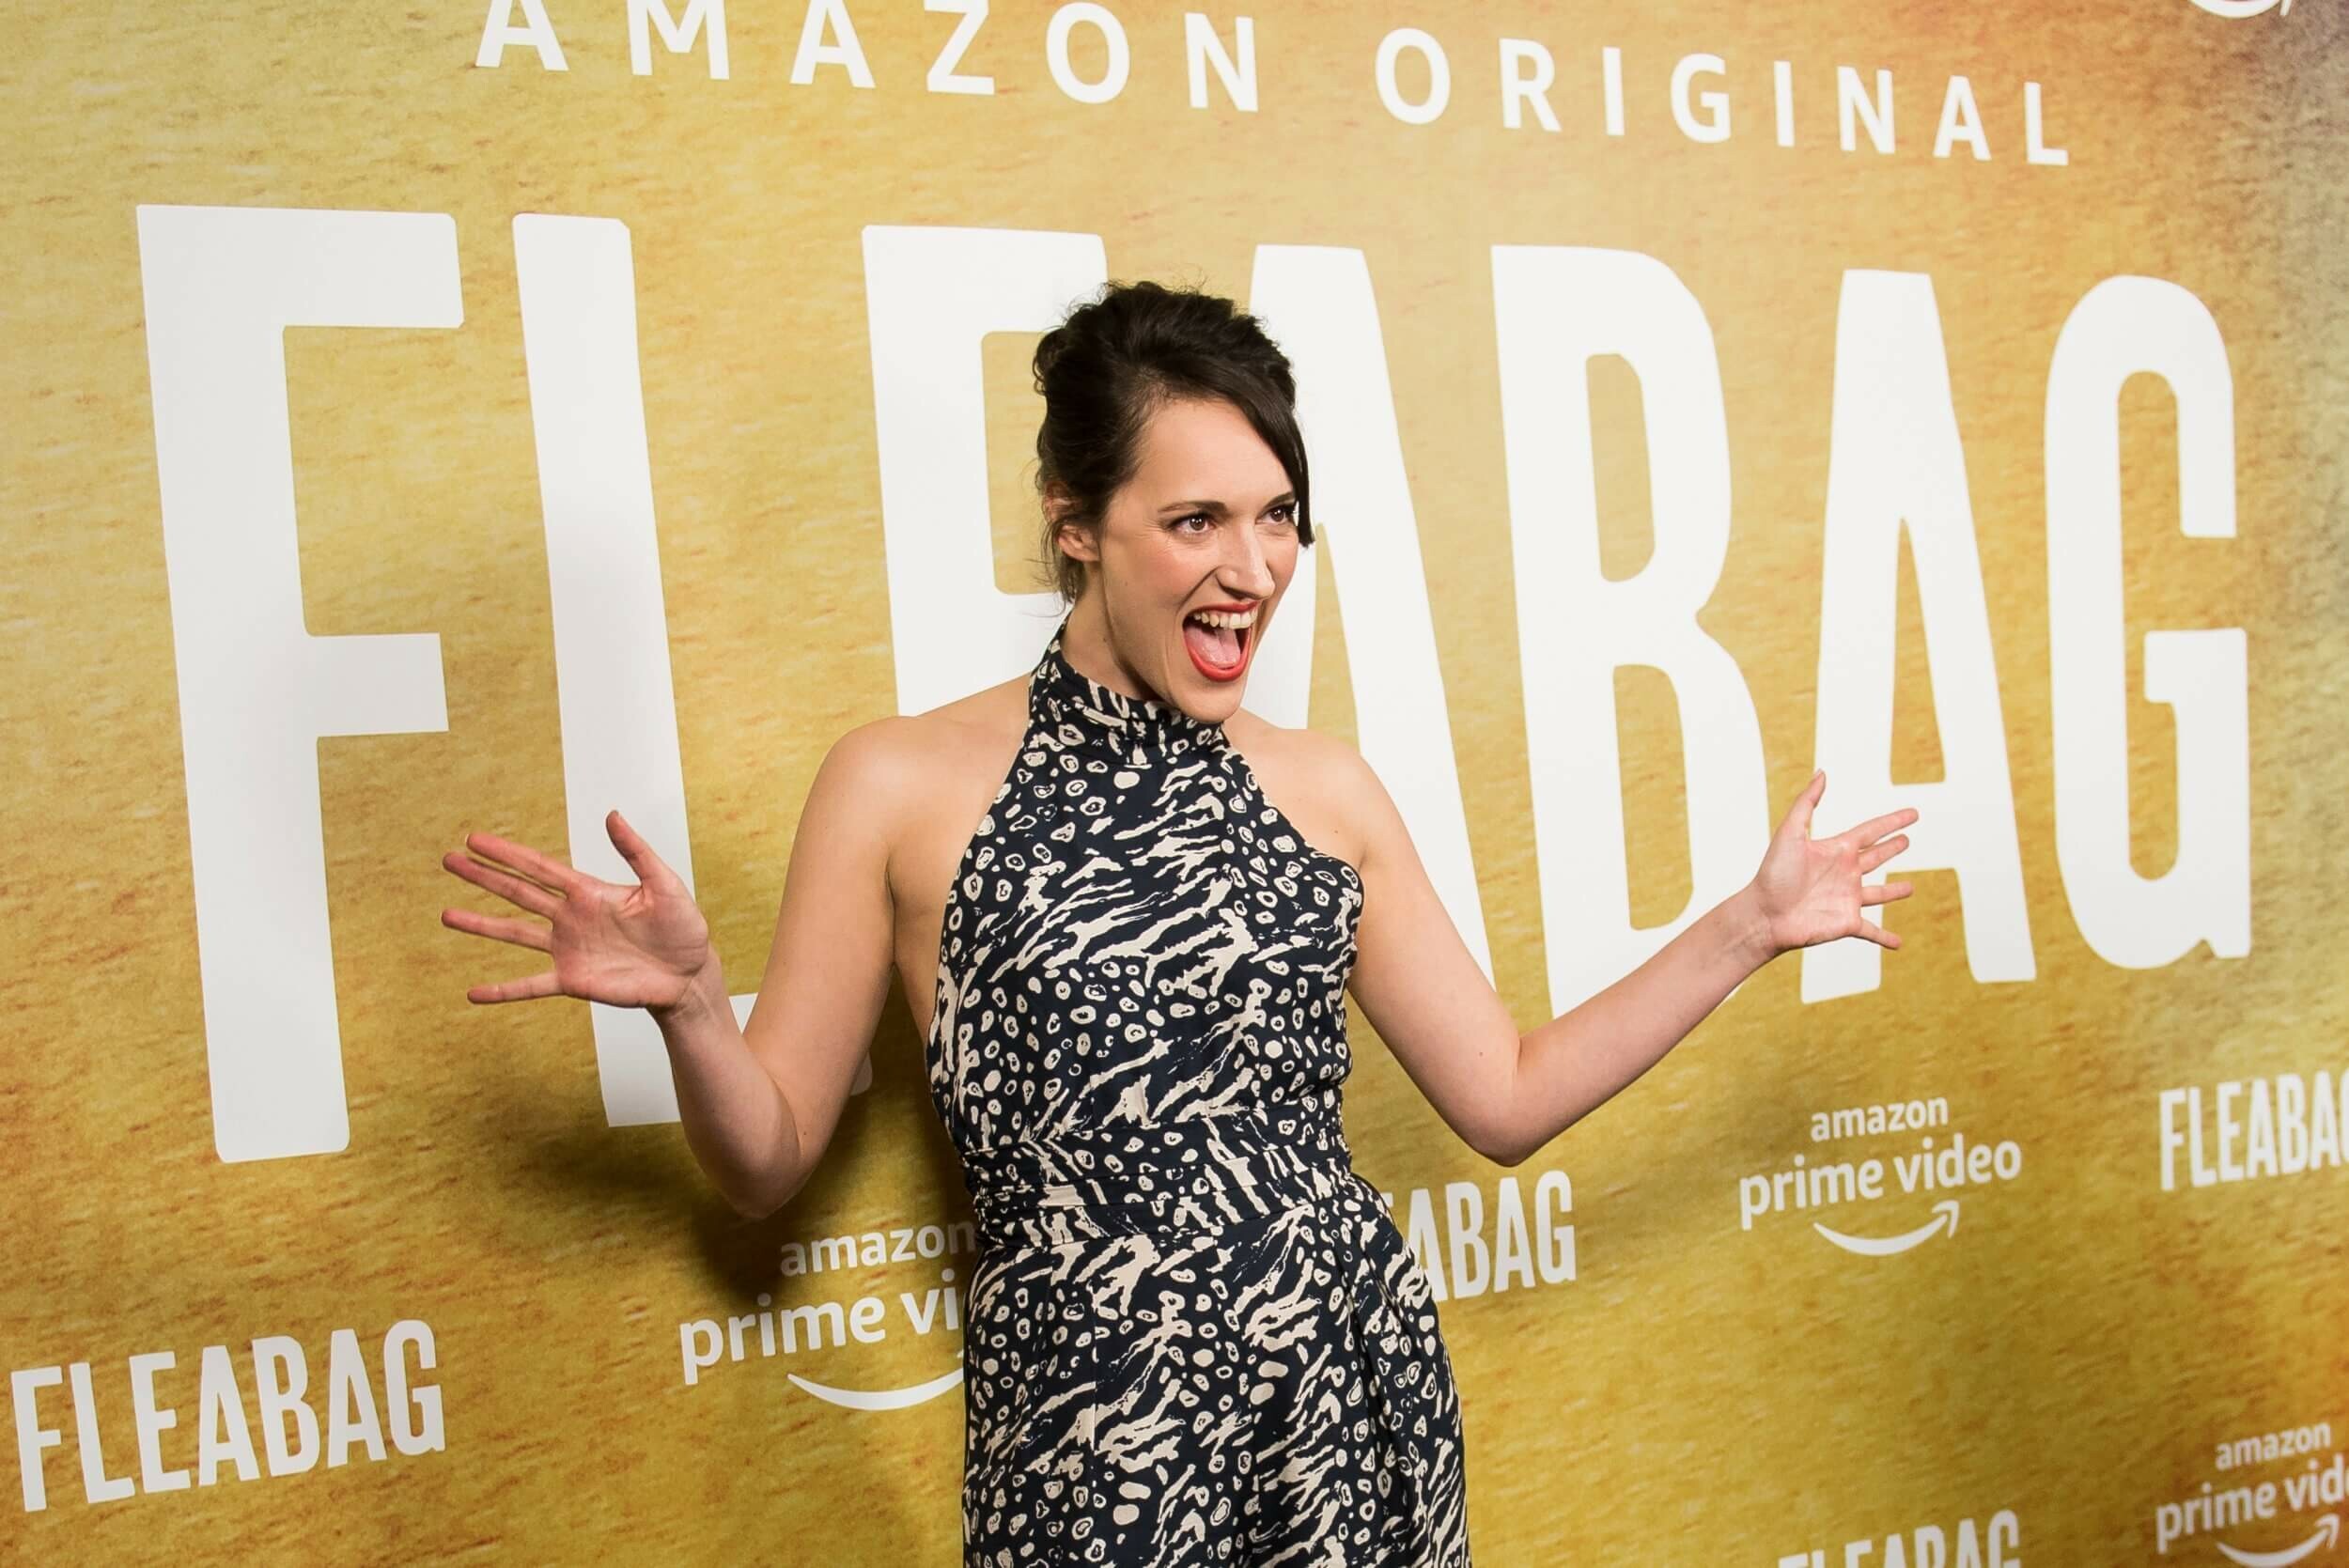 Fleabag (TV Series): Television show created and written by Phoebe Waller-Bridge. 2500x1670 HD Wallpaper.